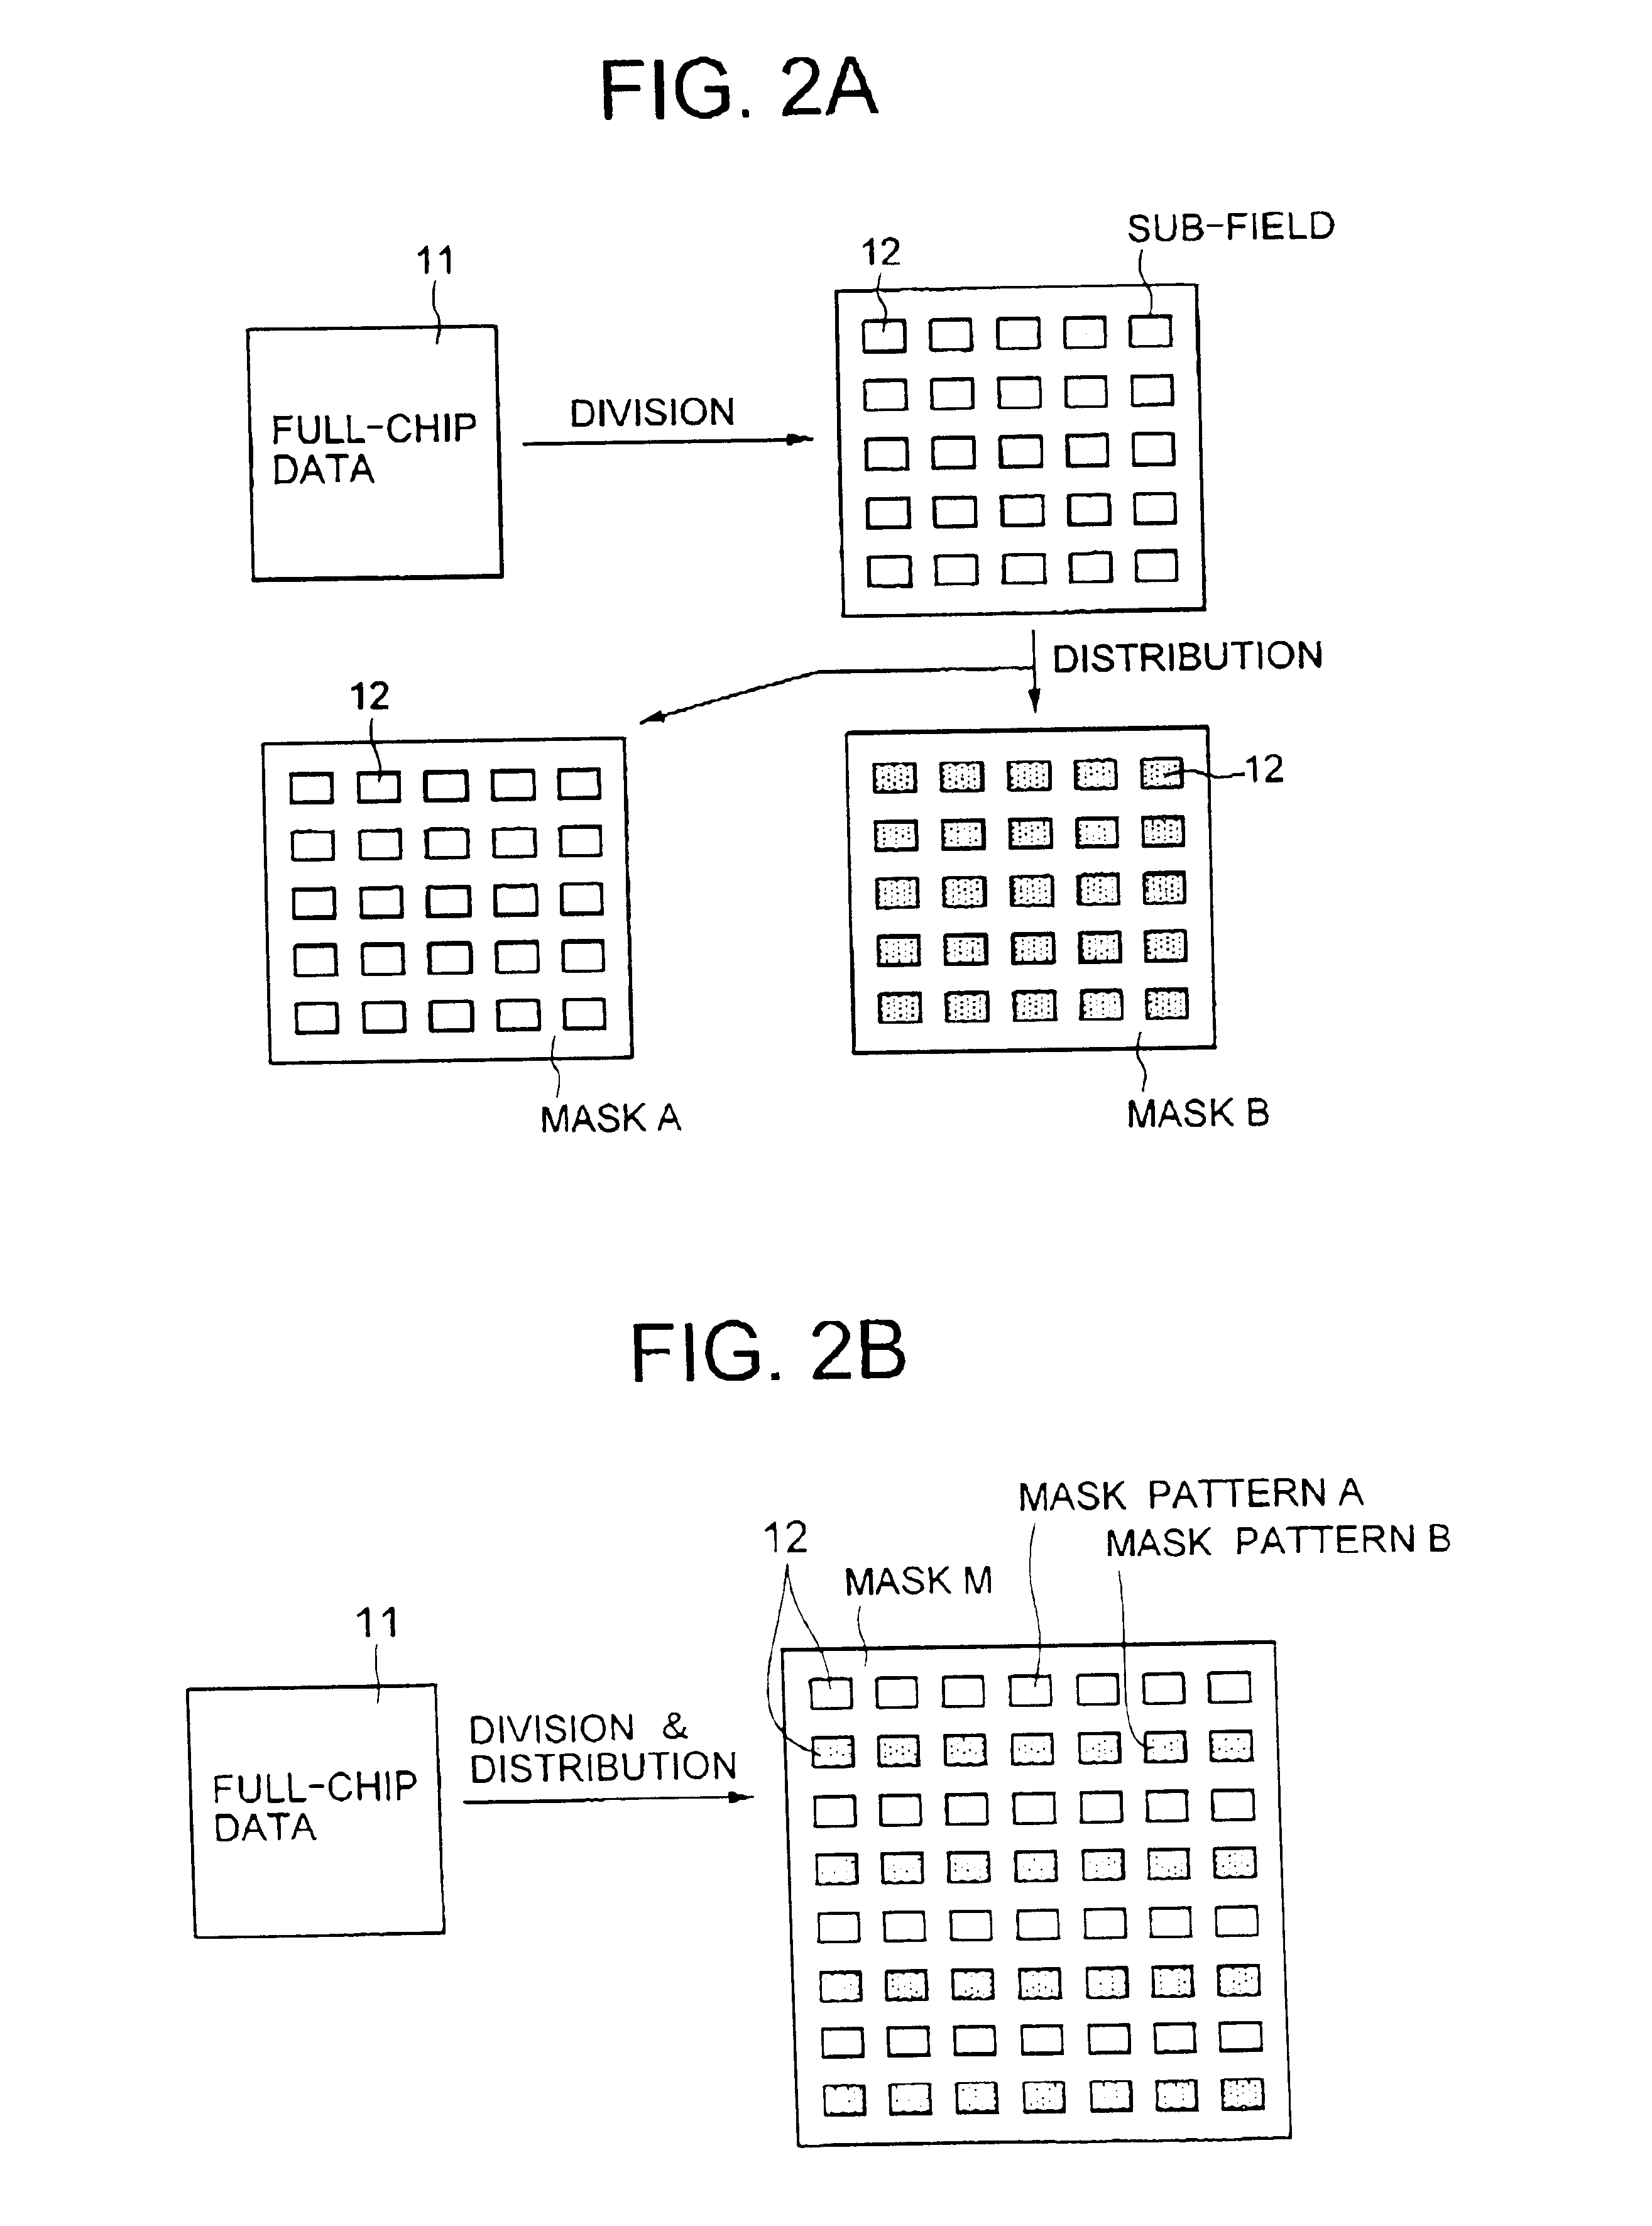 Method for manufacturing a pair of complementary masks